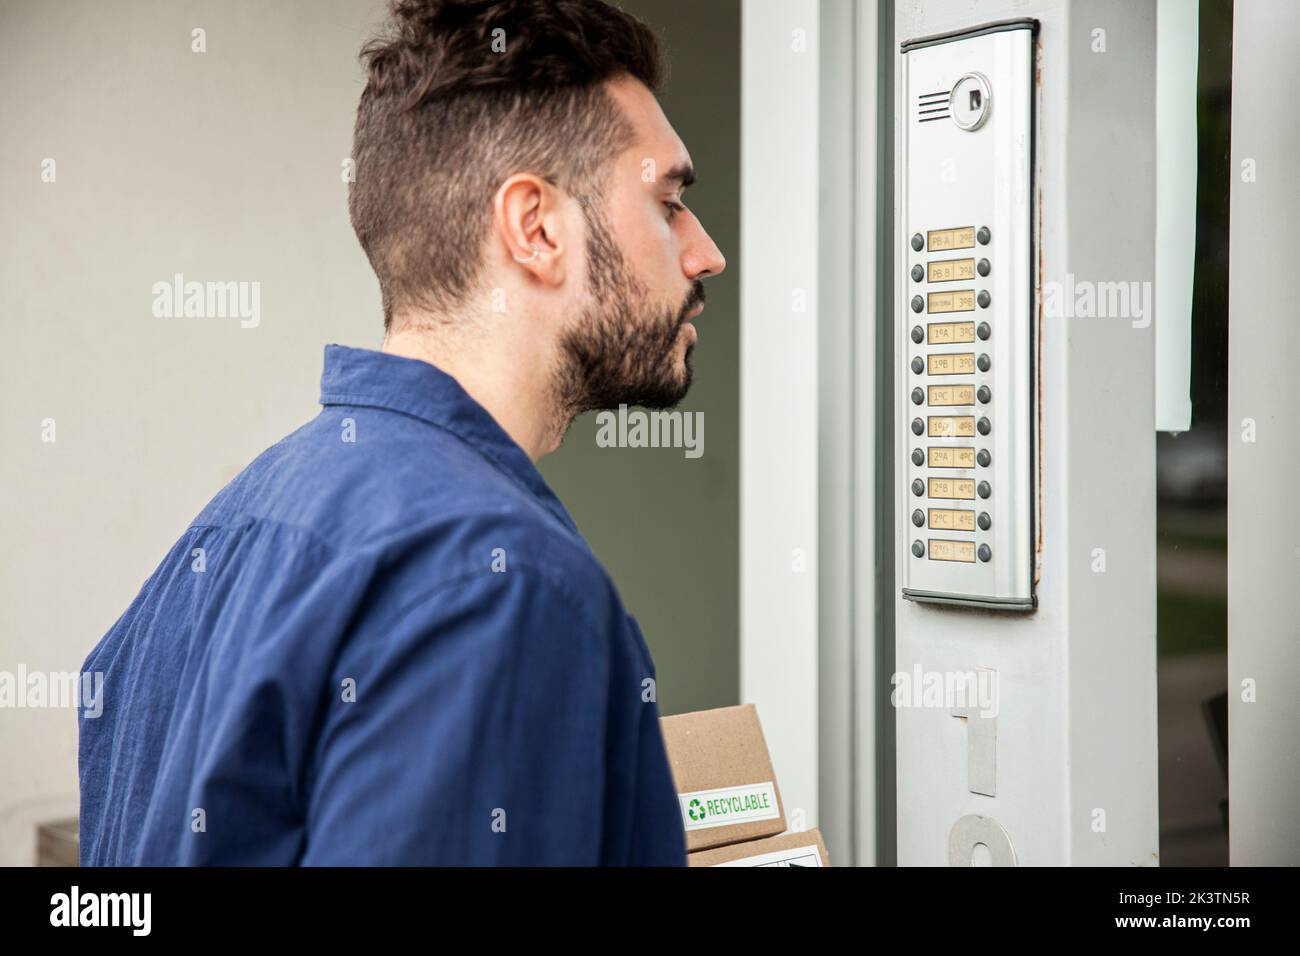 Delivery man standing in doorway while waiting to be attended Stock Photo